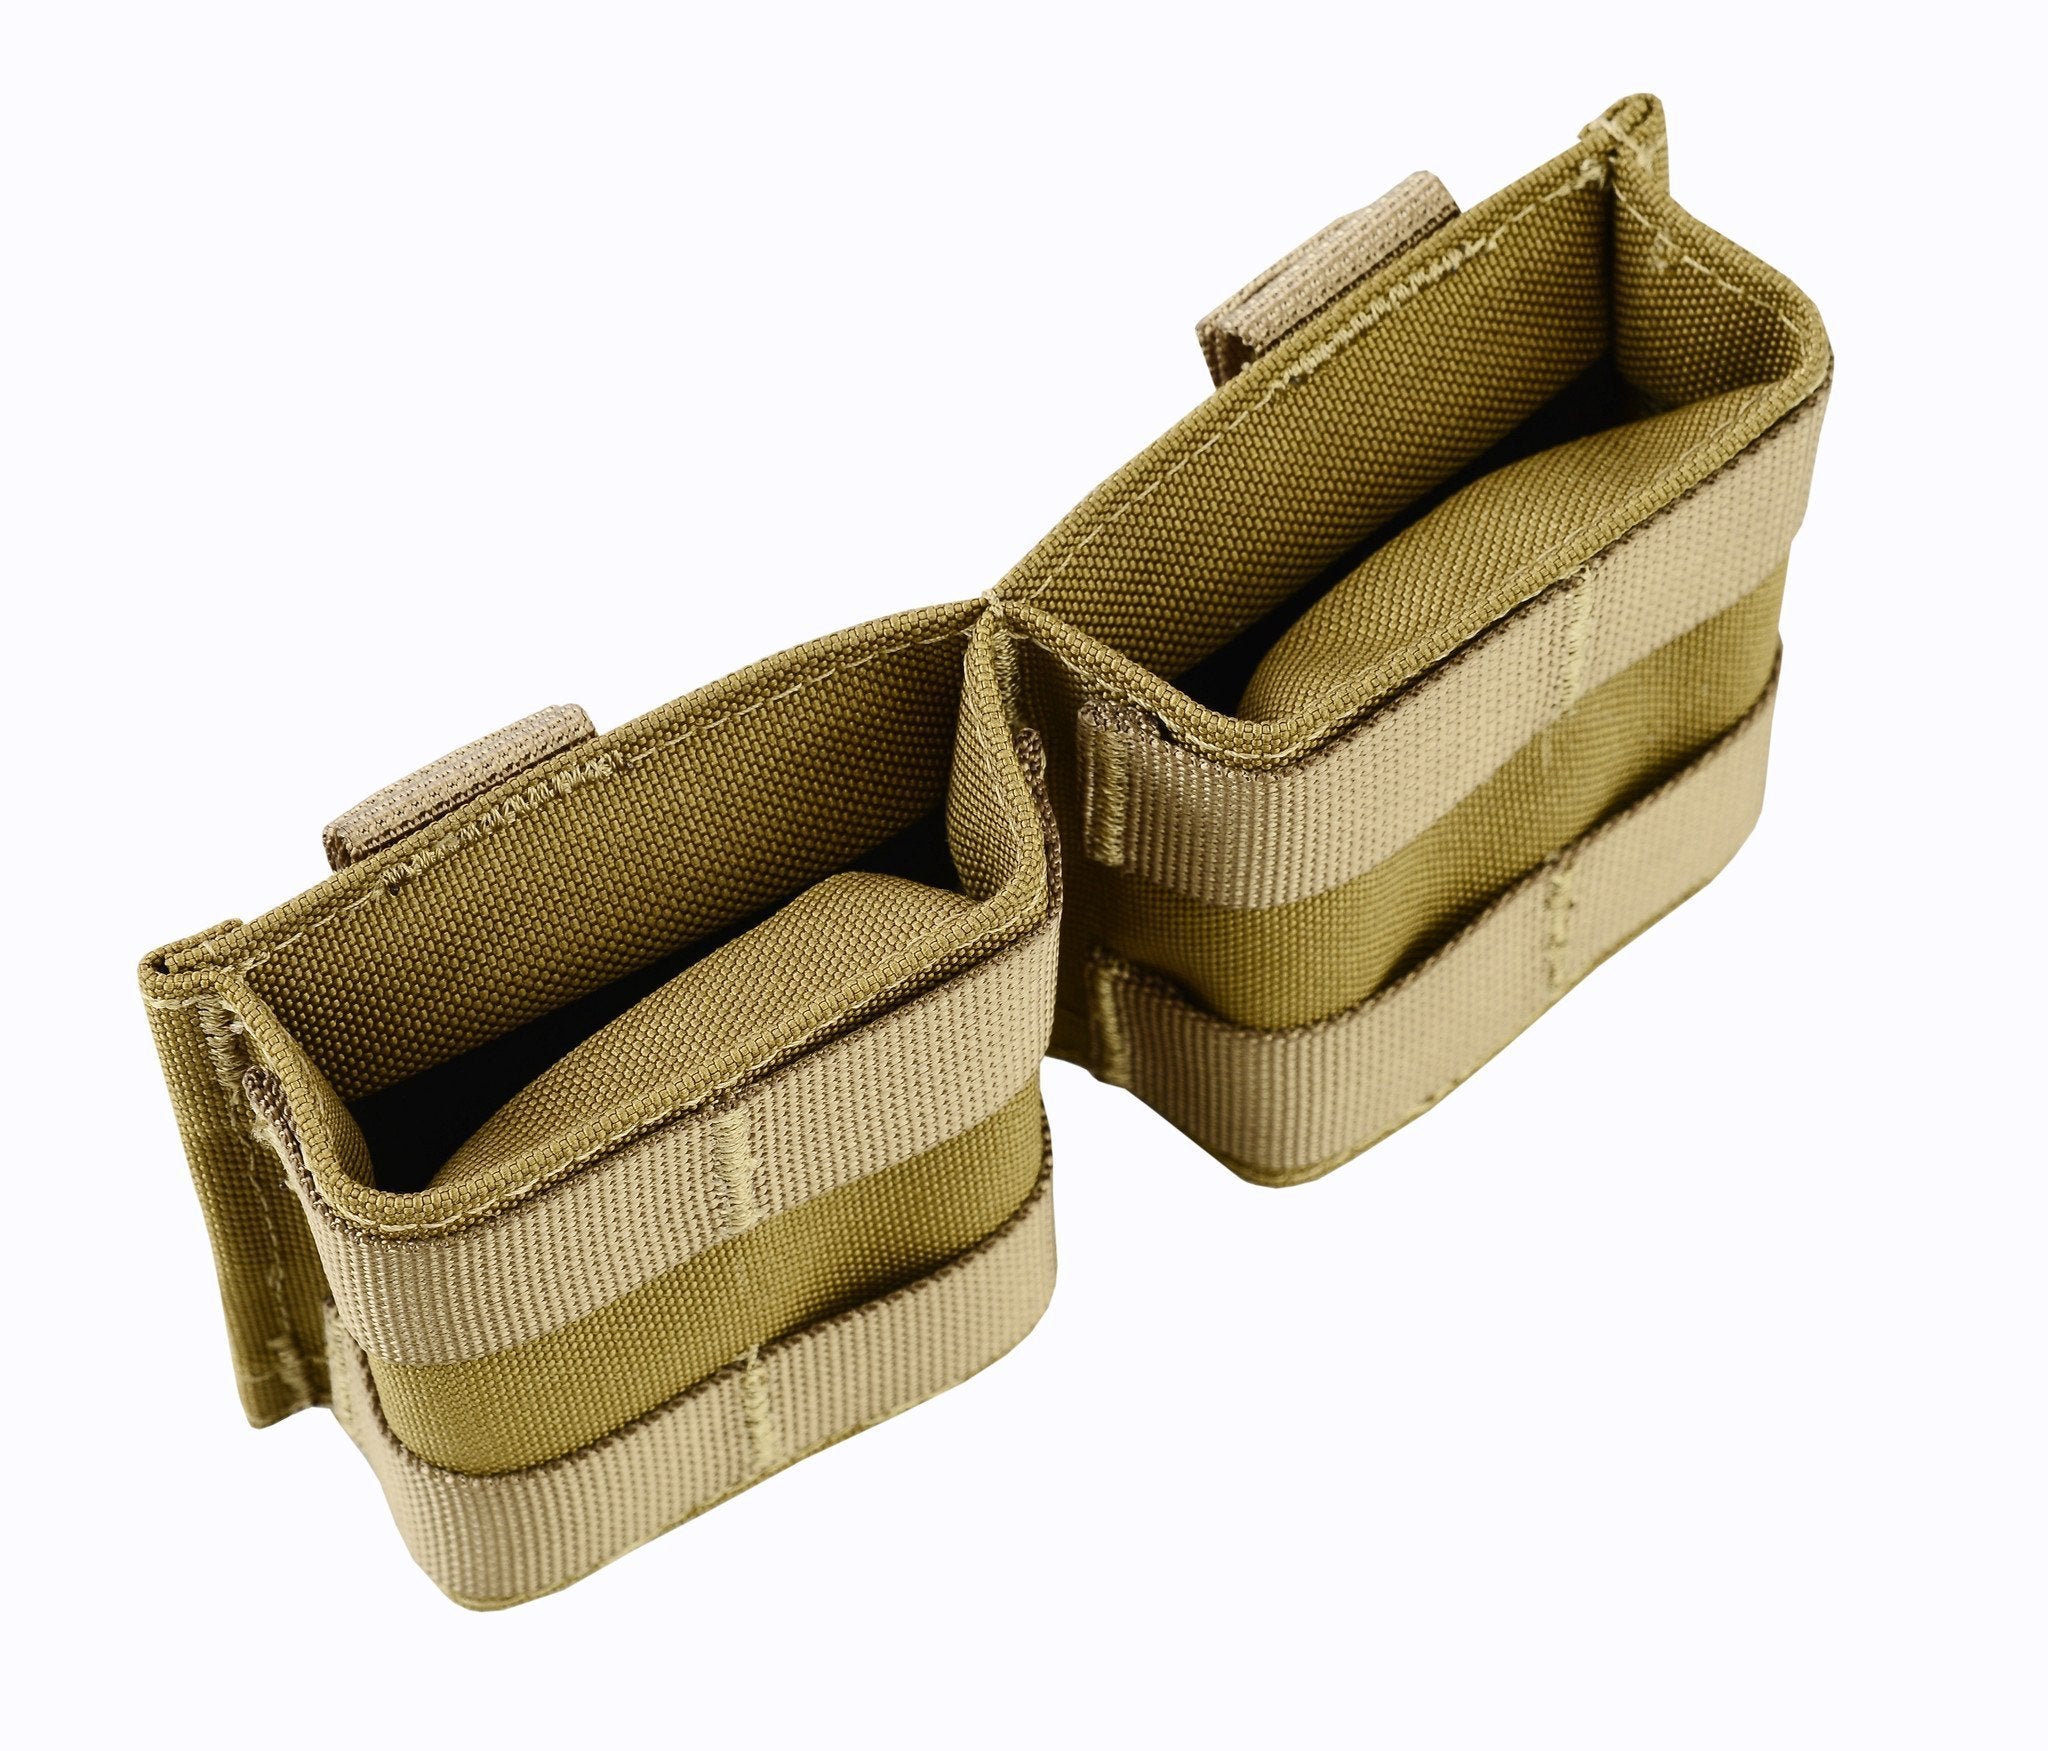 SHE-23032 GRIPTAC DOUBLE M4/M16  MAG POUCH coyote